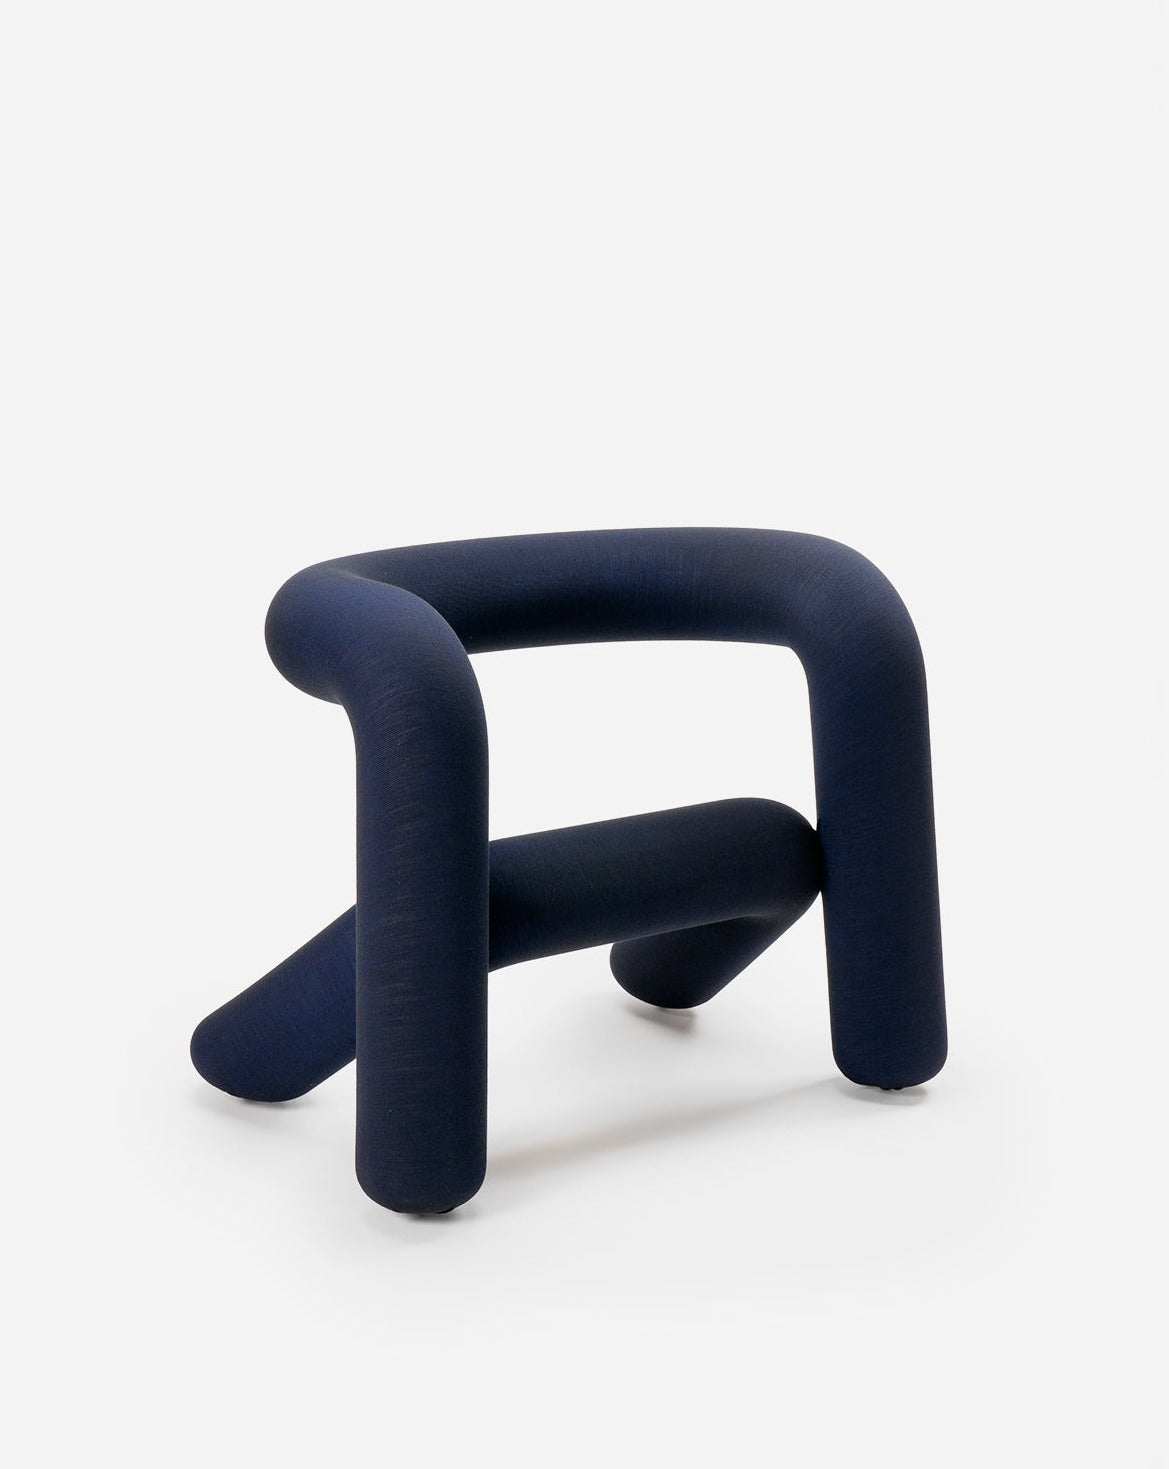 extra bold chair black and blue